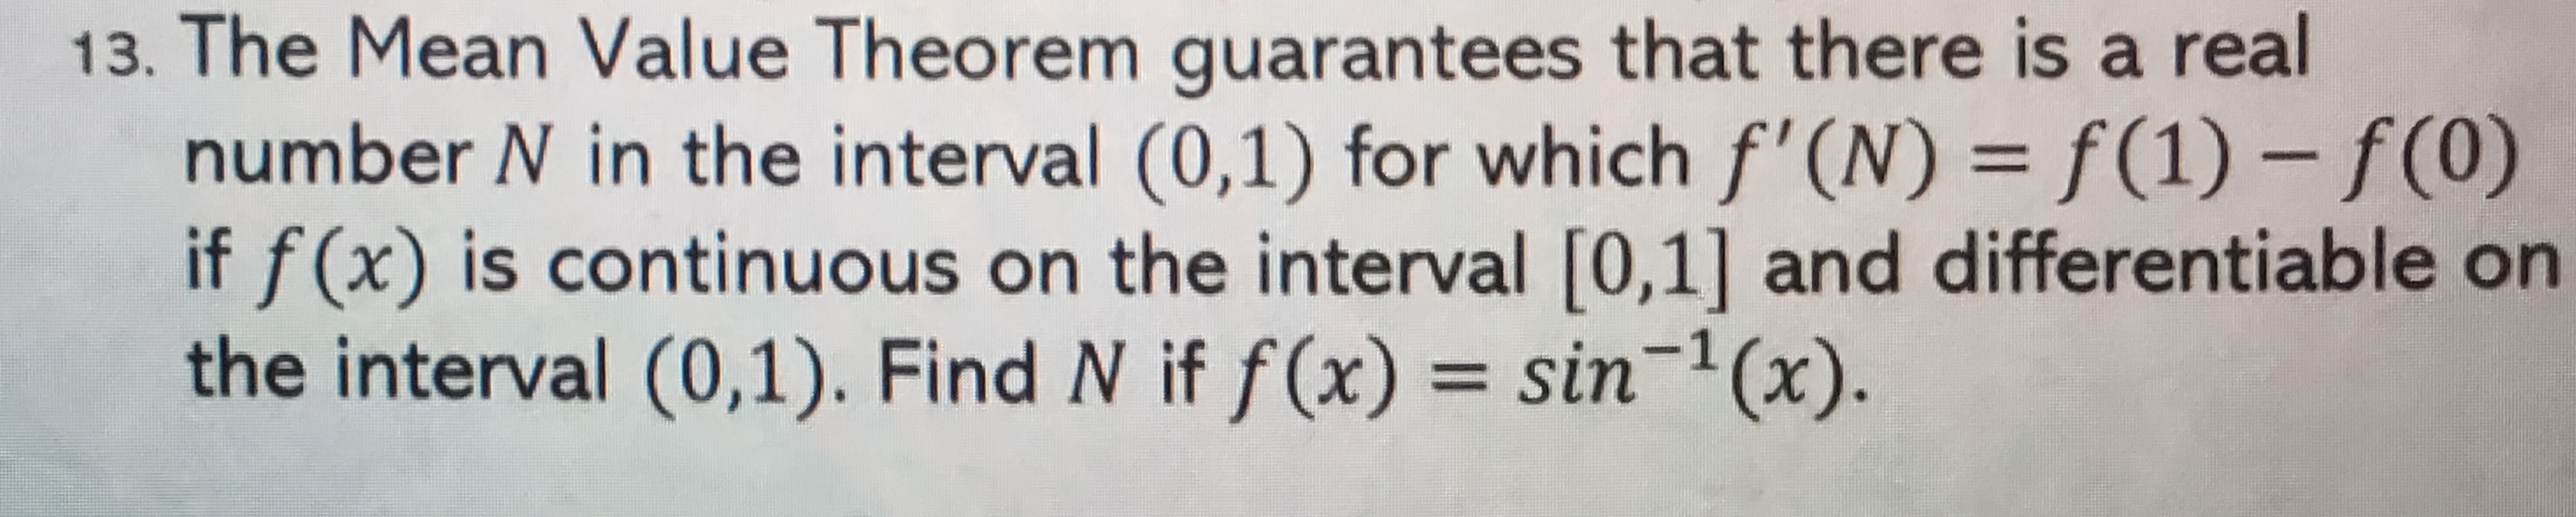 The Mean Value Theorem guarantees that there is a real
number N in the interval (0,1) for which f'(N) = f(1) – f(0)
if f (x) is continuous on the interval [0,1] and differentiable on
the interval (0,1). Find N if f(x) = sin-'(x).
%3D
